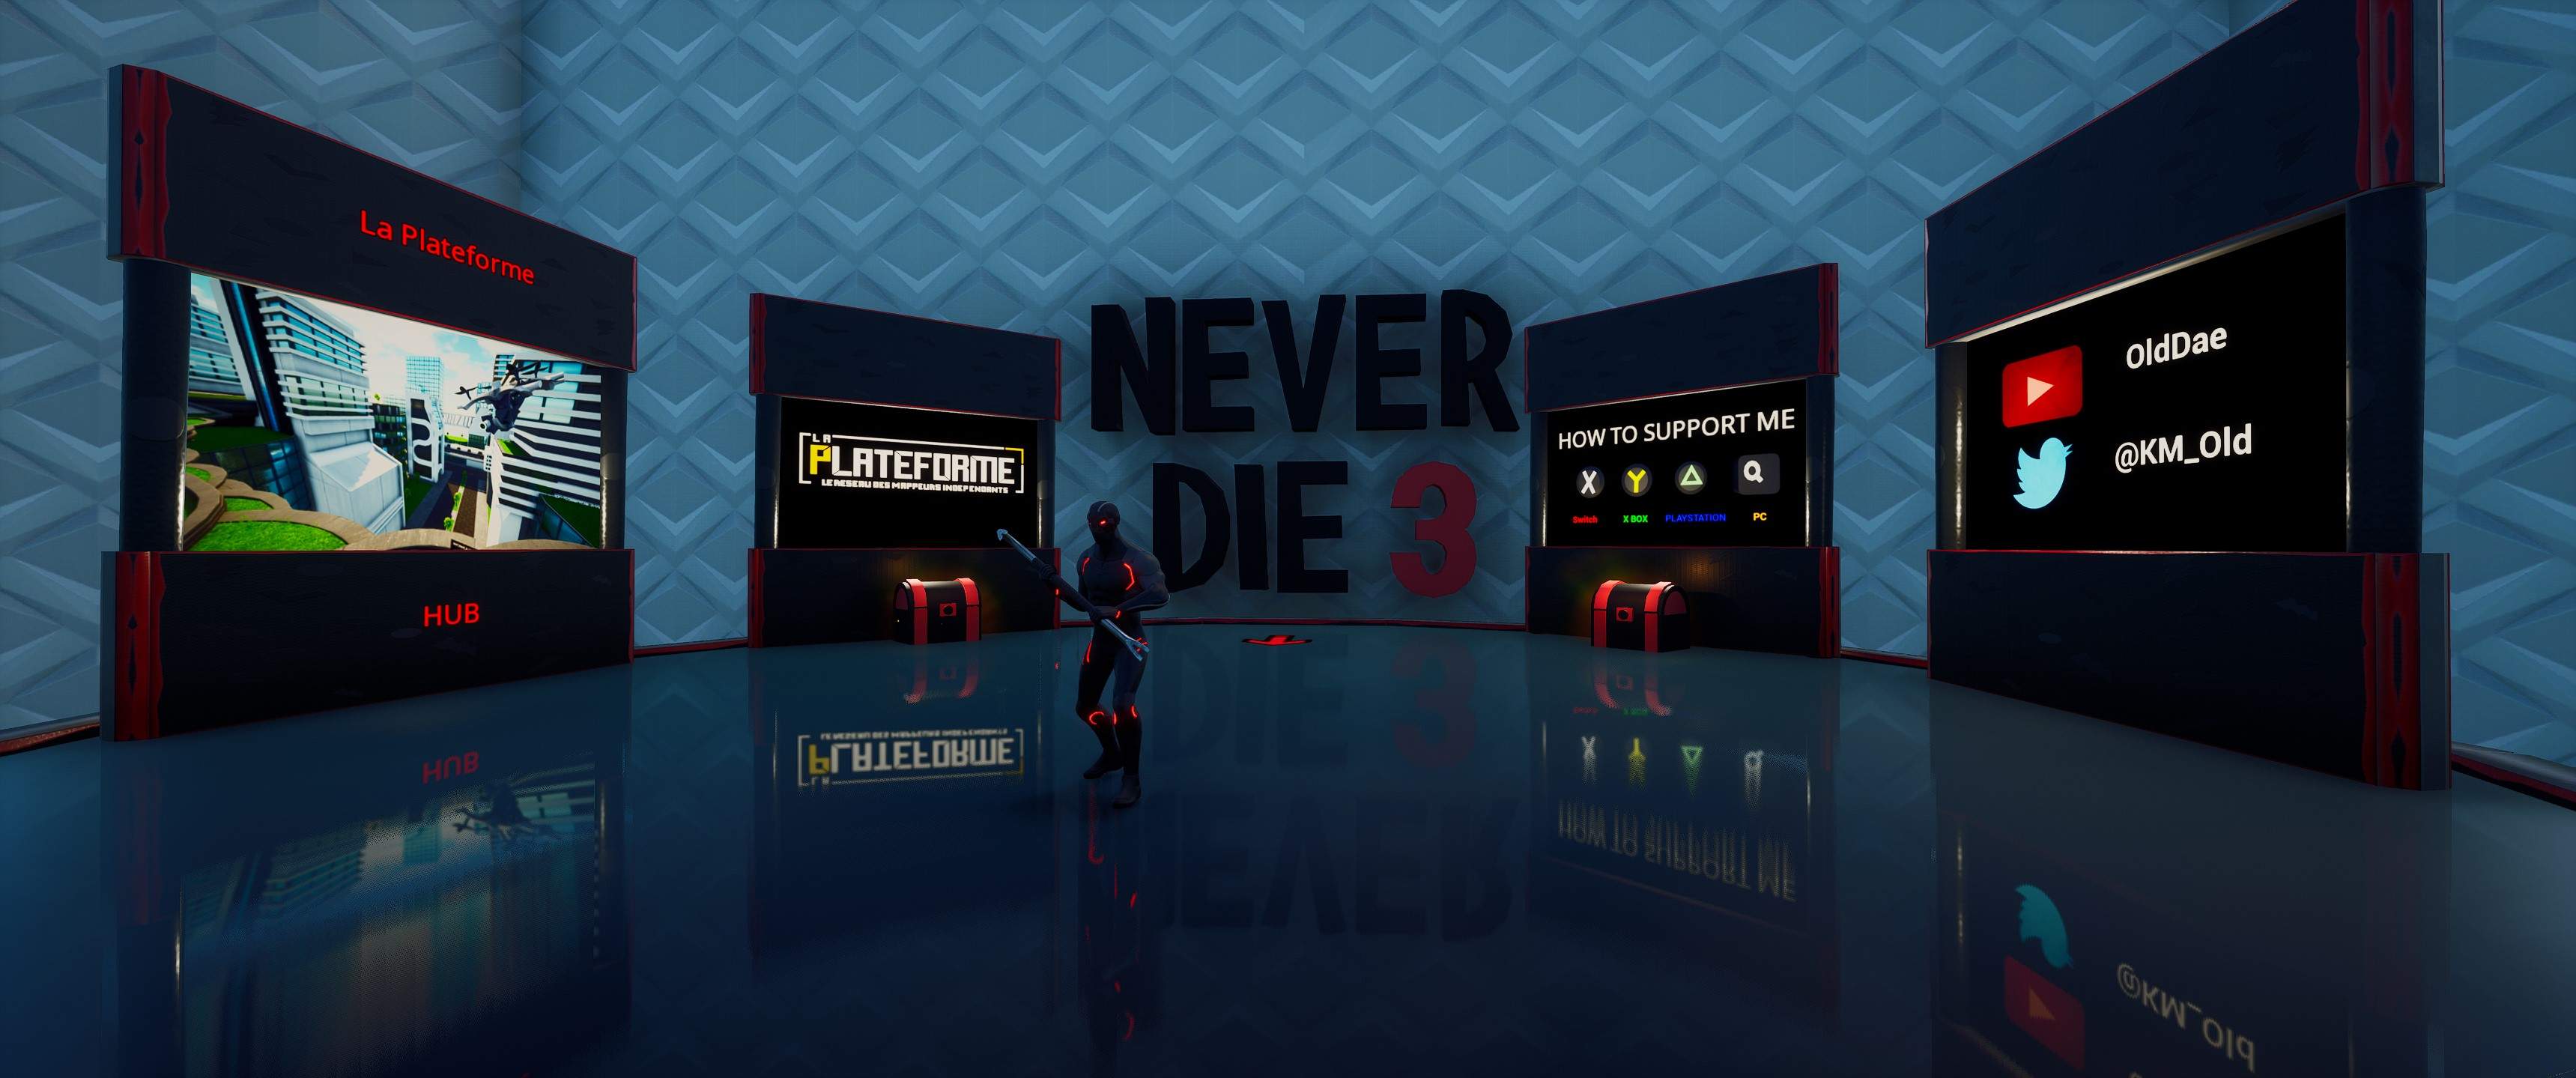 NEVER DIE 3 - 20 LEVELS image 2